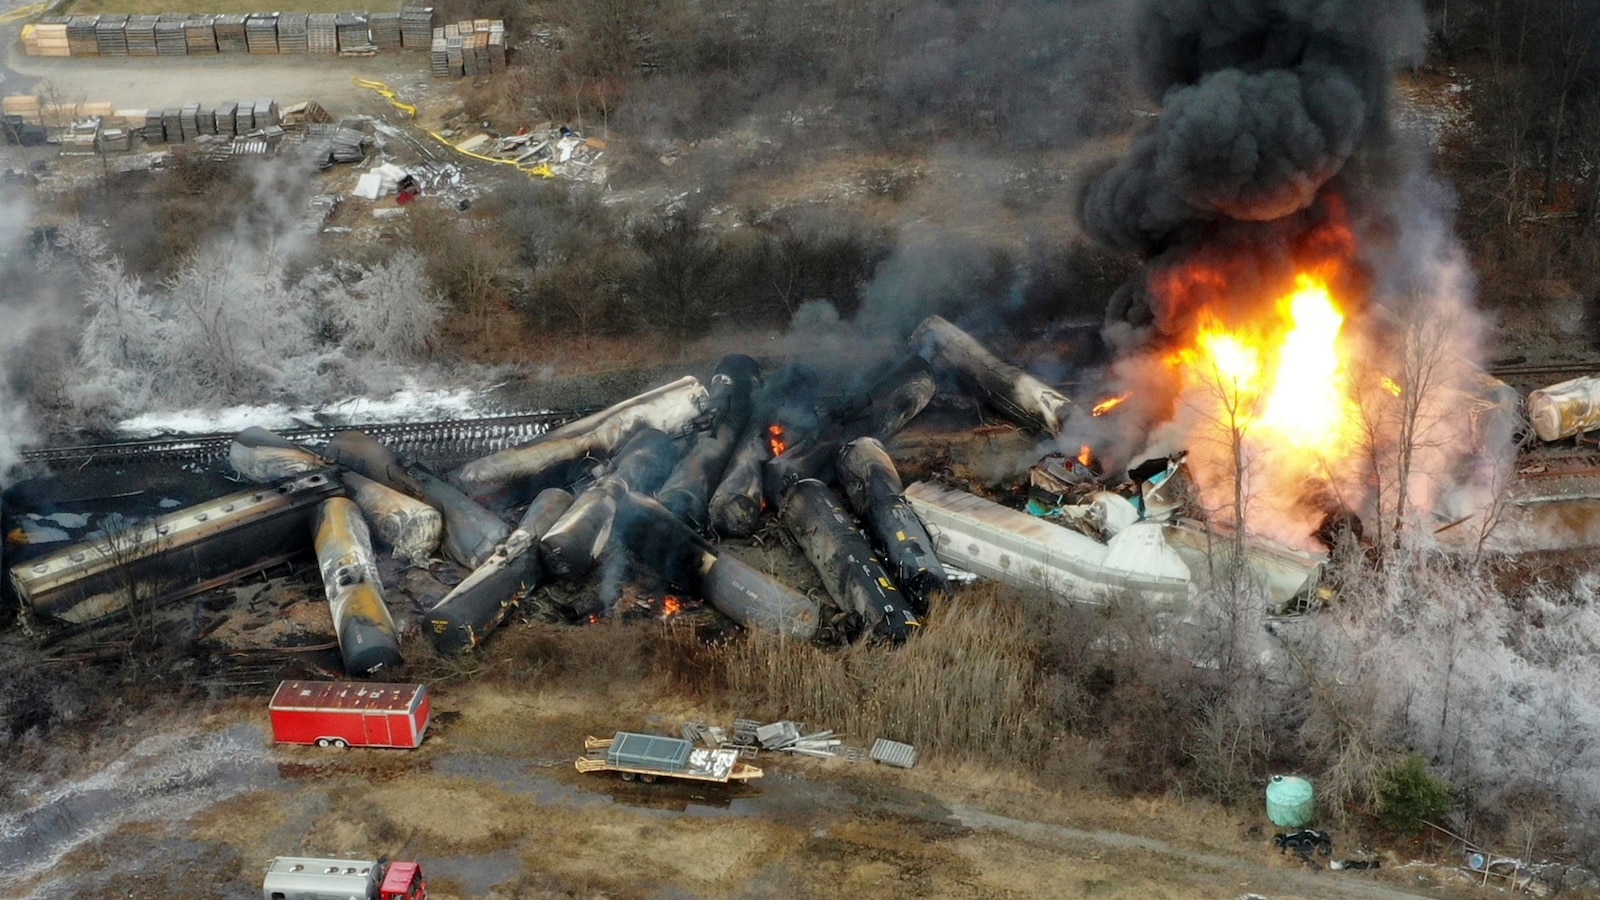 Whistleblower questions delays and mistakes in how EPA used sensor plane after fiery Ohio derailment